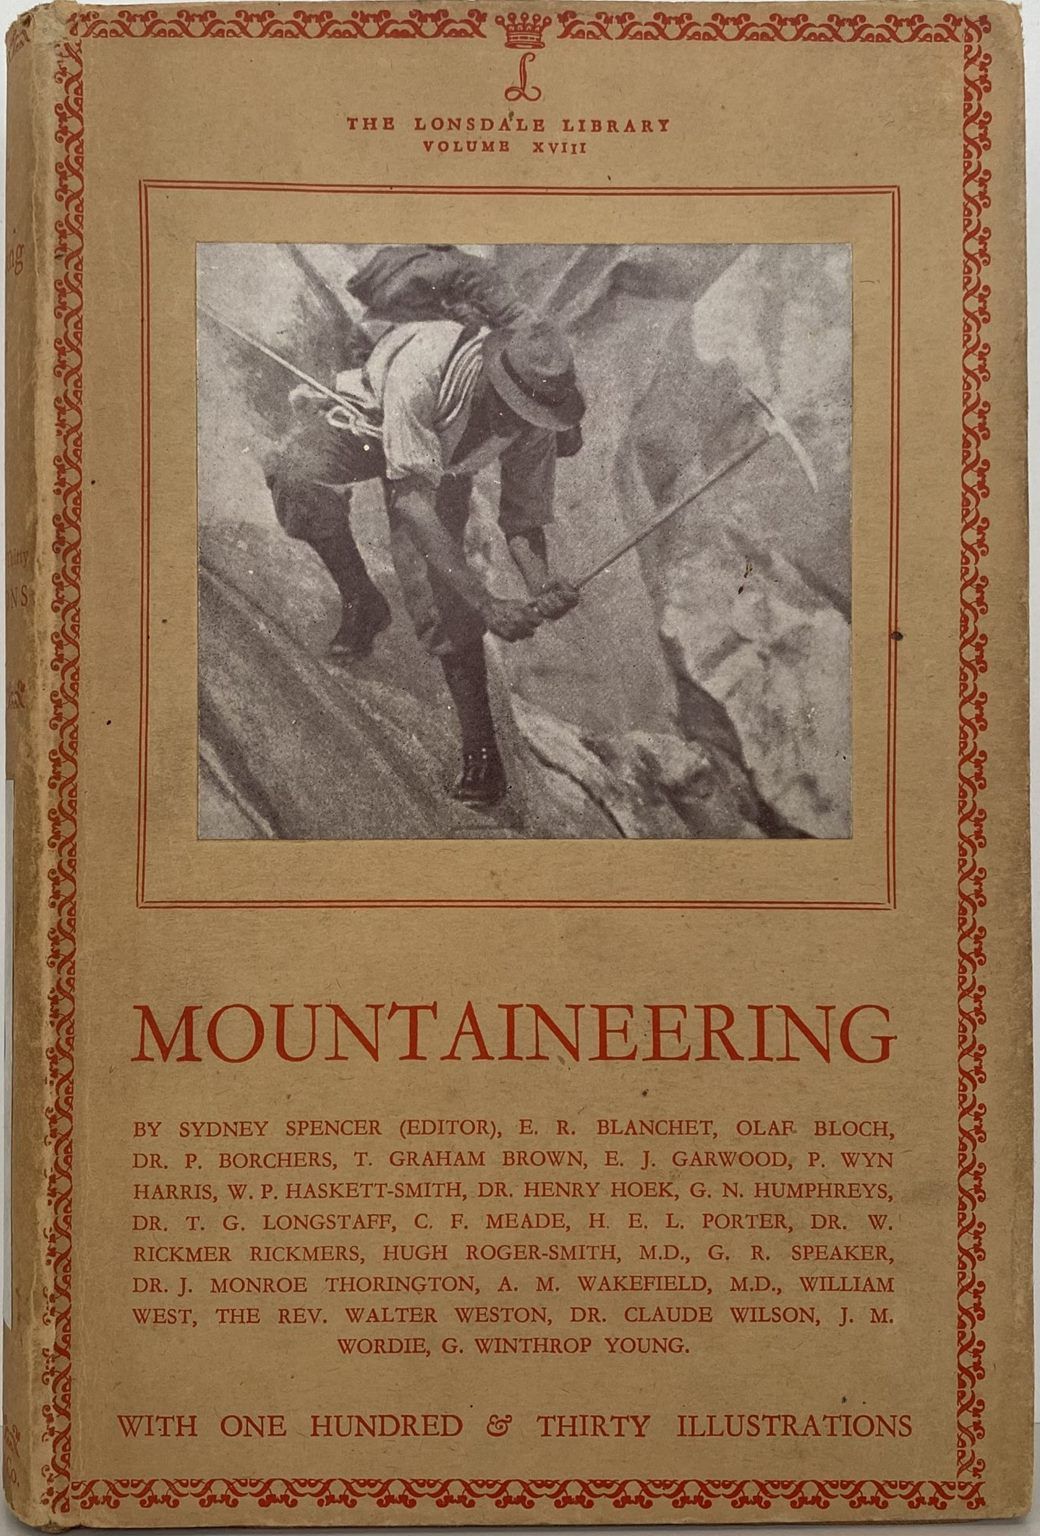 MOUNTAINEERING: The Lonsdale Library VOL 18